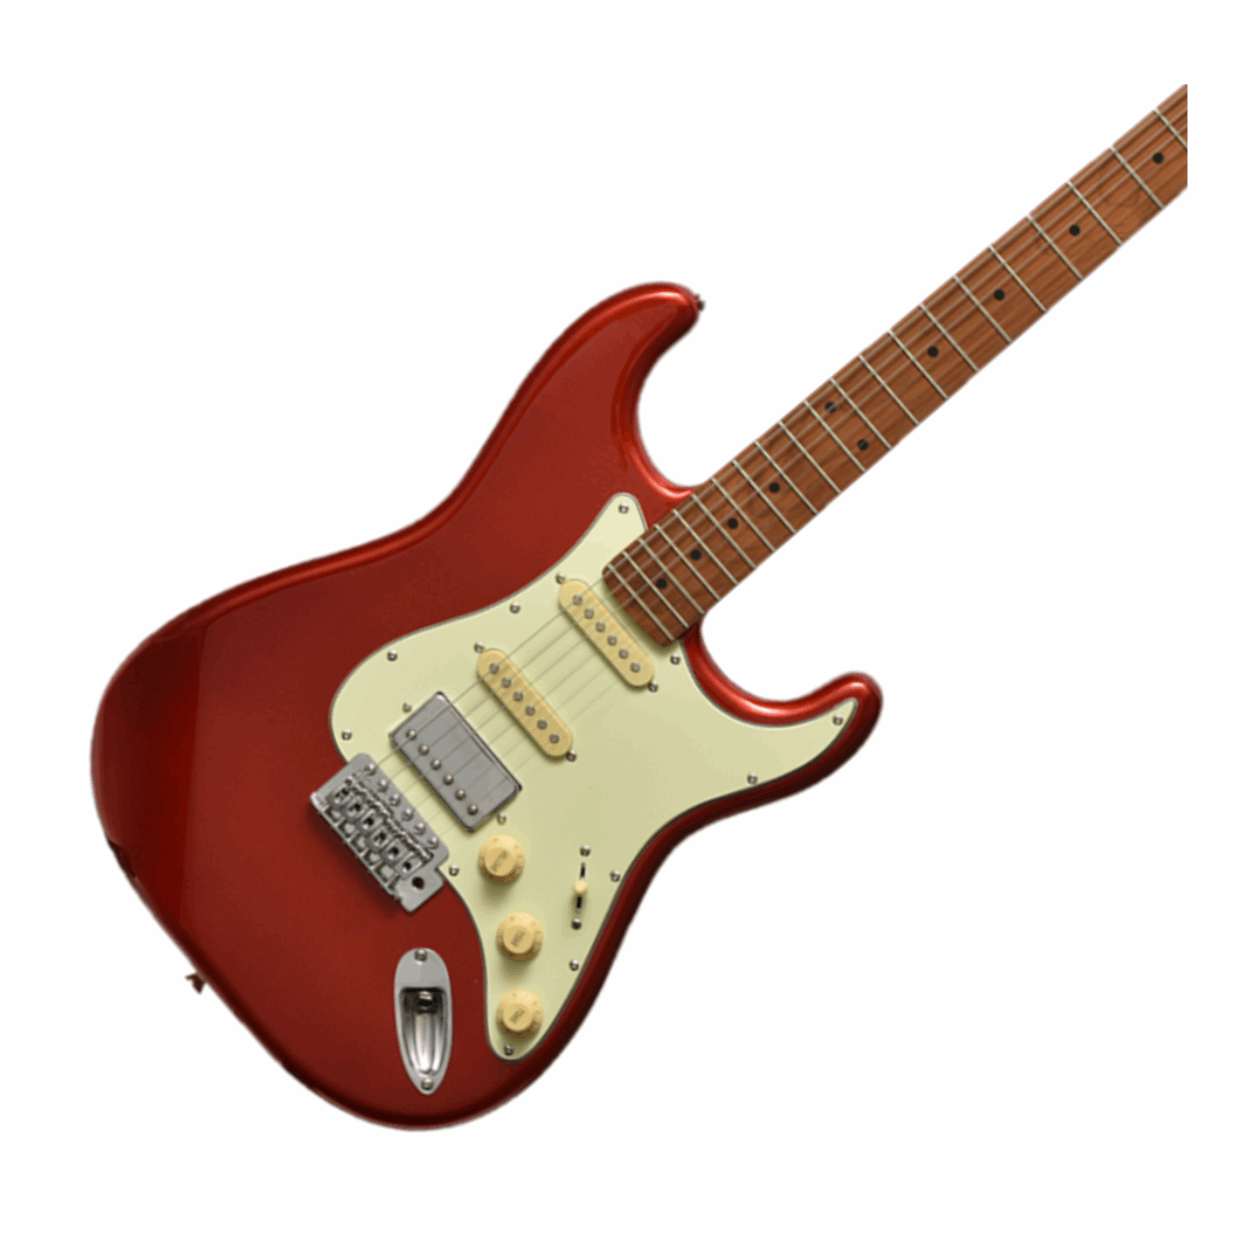 Bacchus Bst-2-rsm/m-car Universe Series Roasted Maple Electric Guitar, Candy Apple Red With Bag